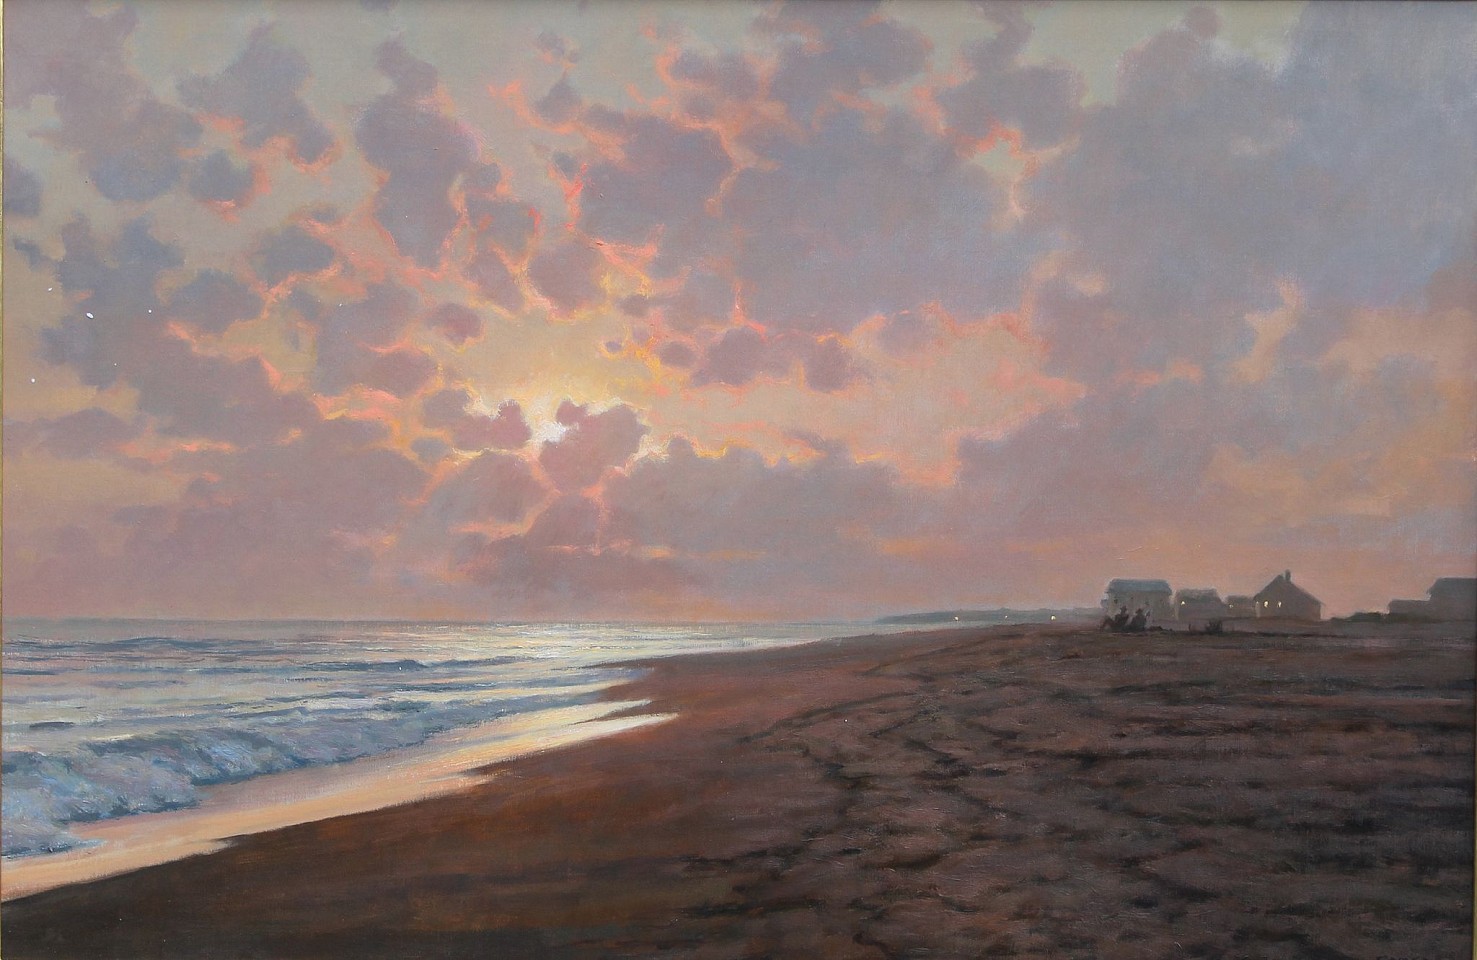 Frank Corso, Misty Evening Sunset, 2016
oil on canvas, 24 x 36 in. (61 x 91.4 cm)
FC160701